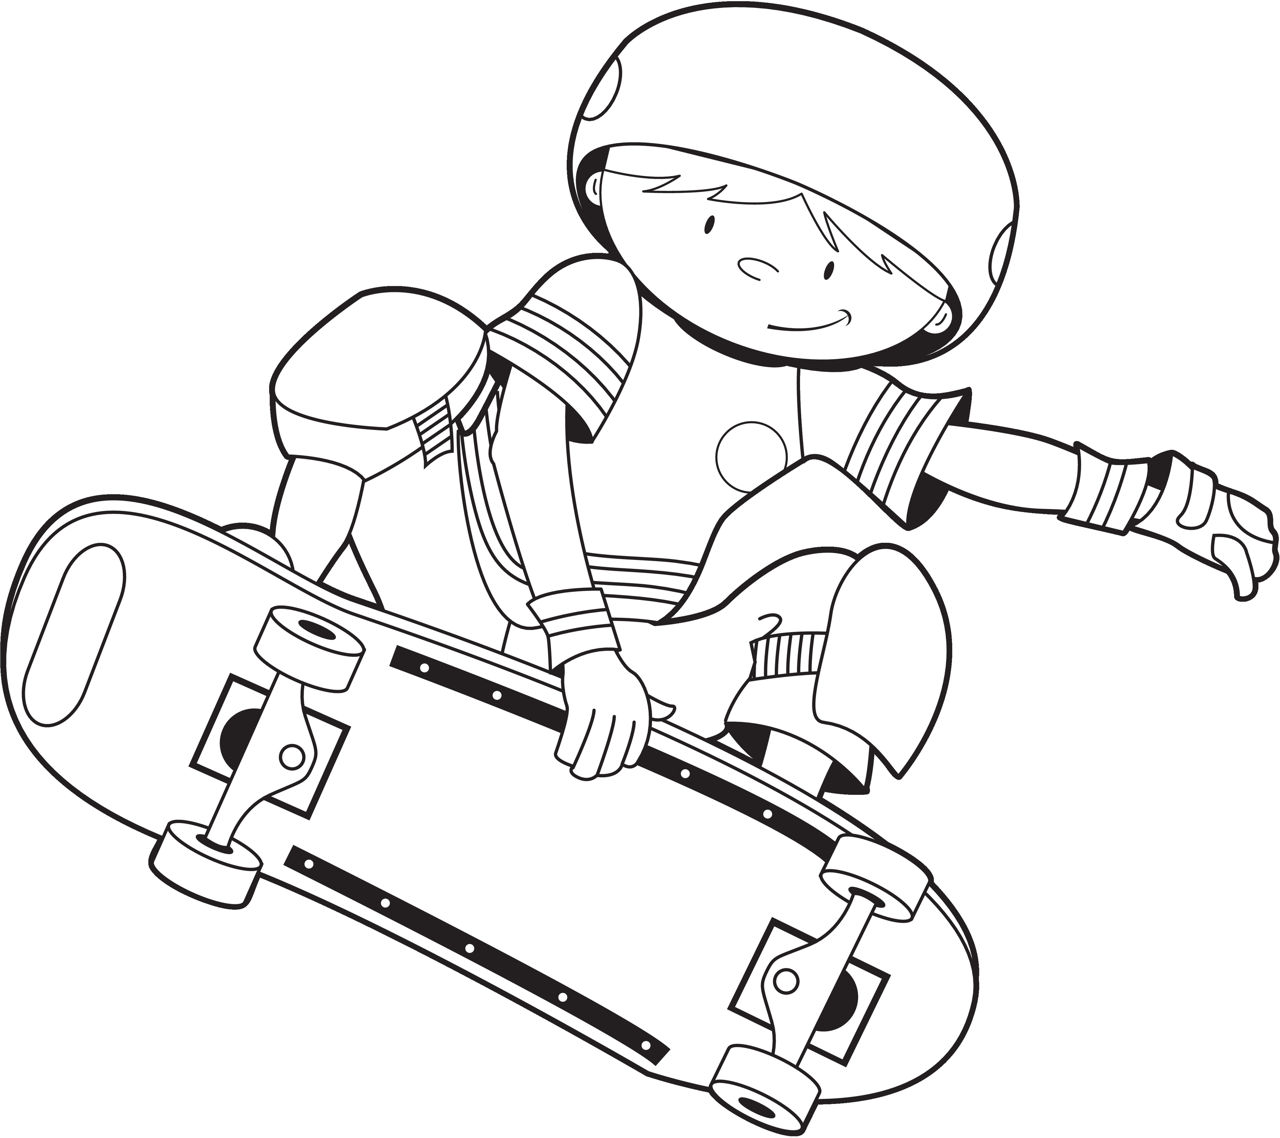  Awesome Coloring Pages For Boys 7